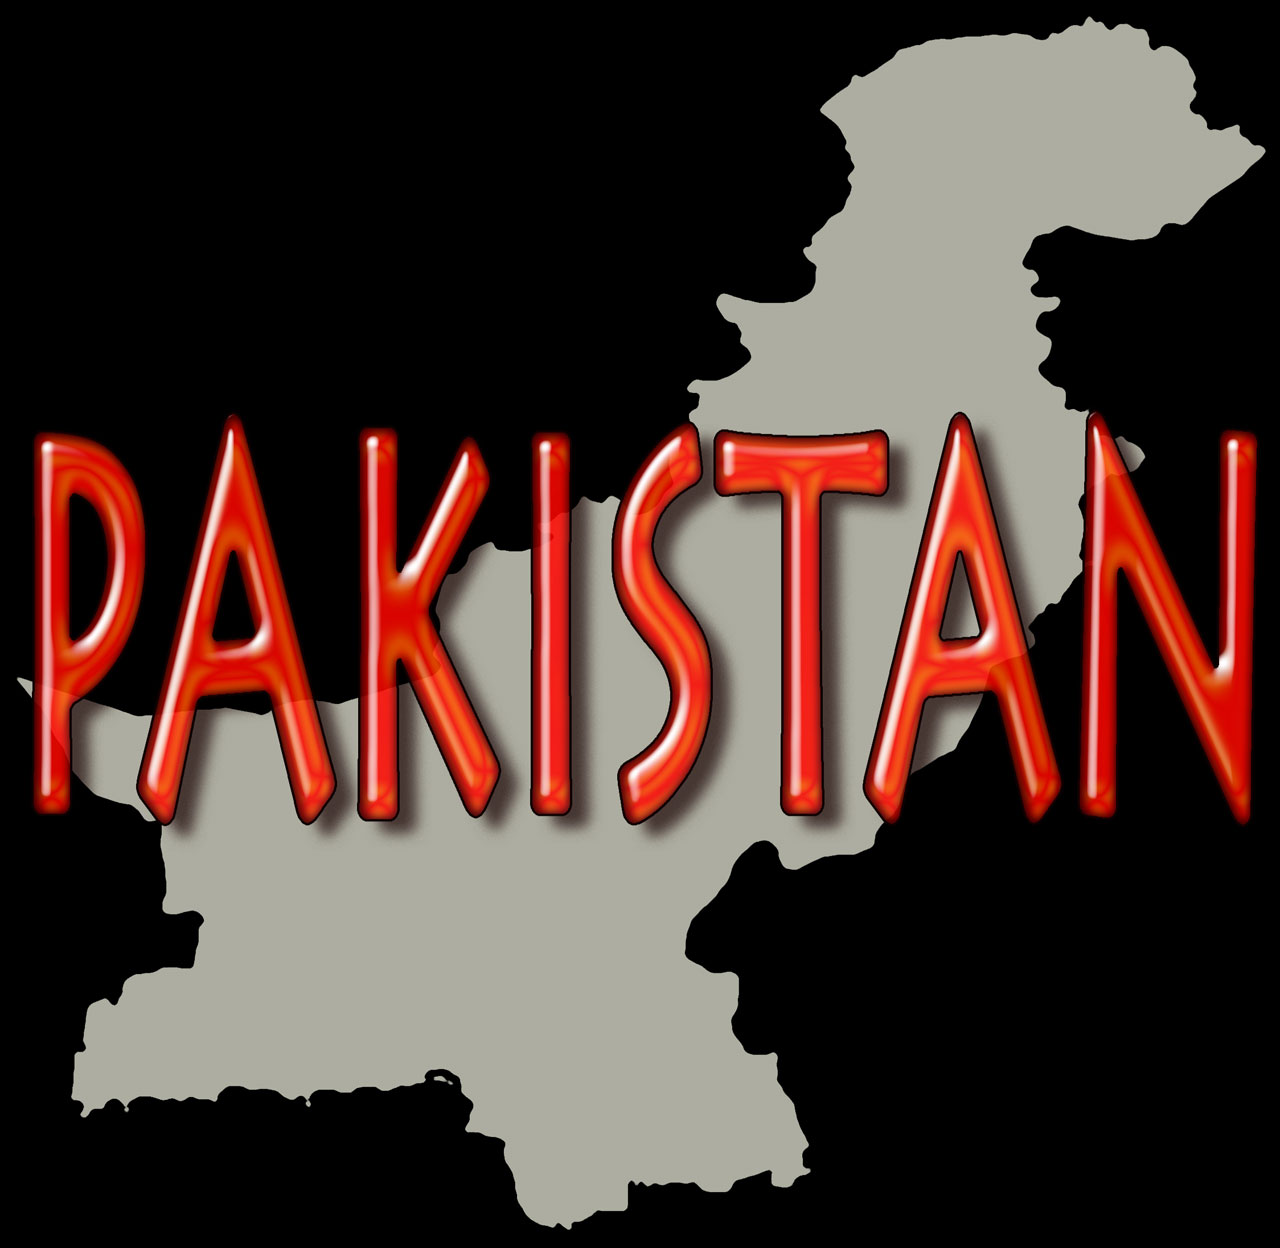 Image to accompany information about the country of Pakistan